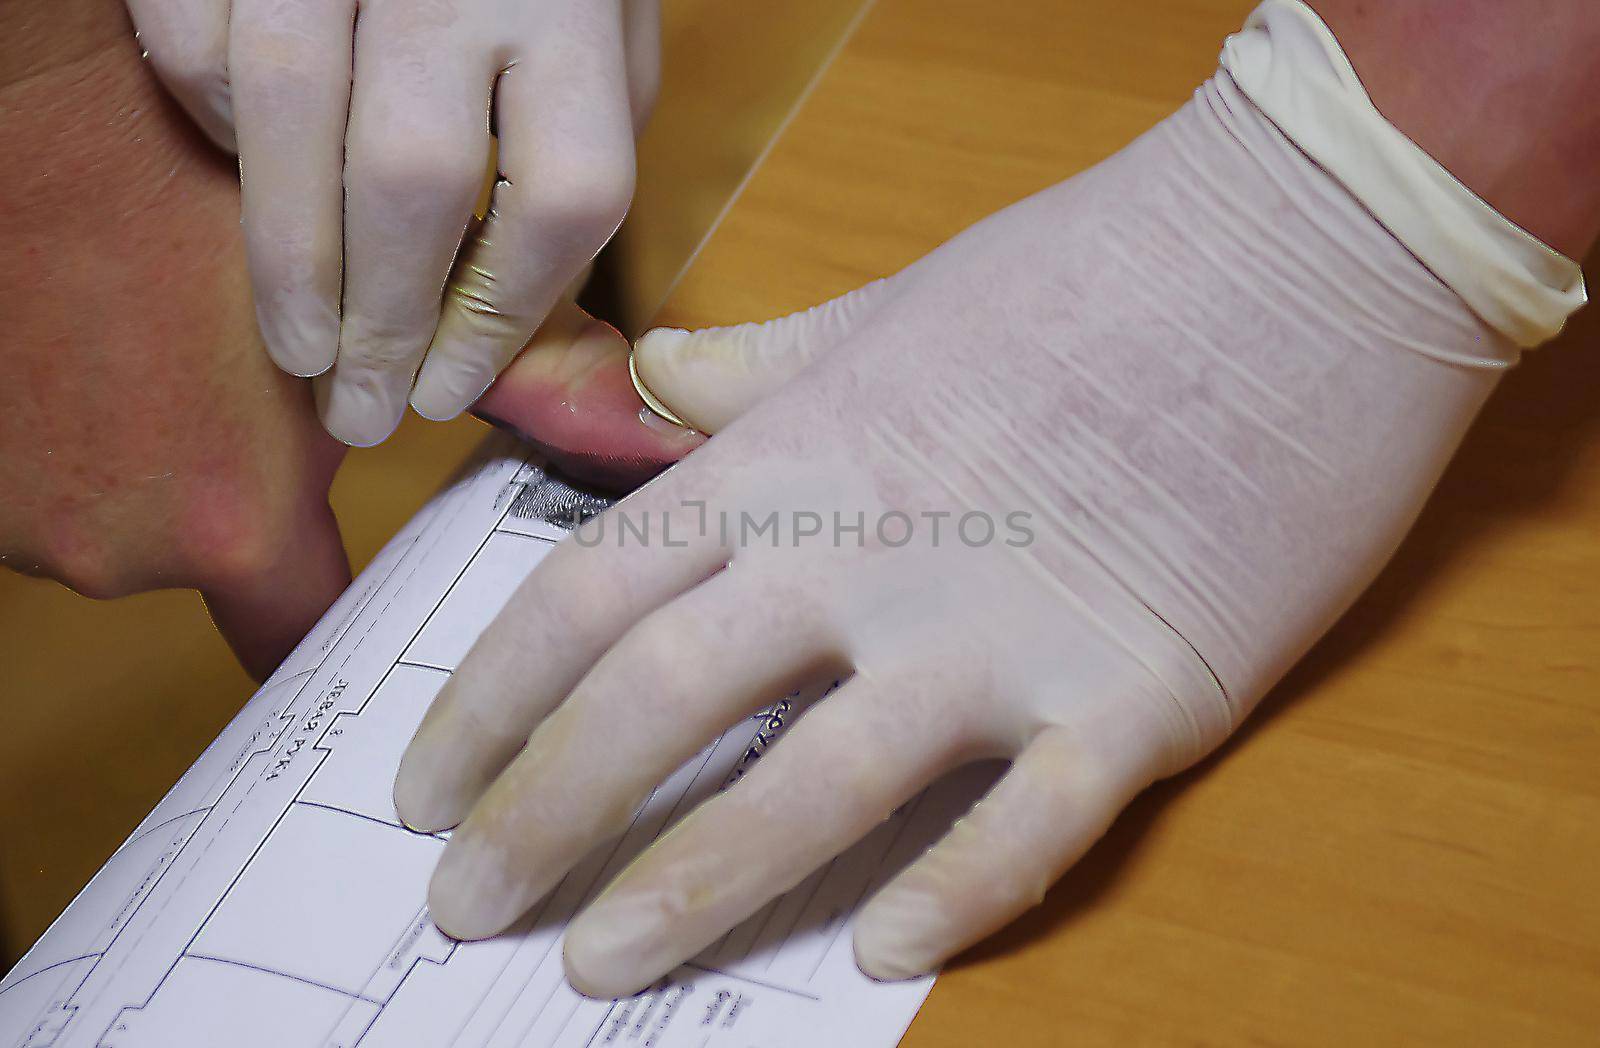 A police officer wearing rubber gloves takes a fingerprint of a suspect.